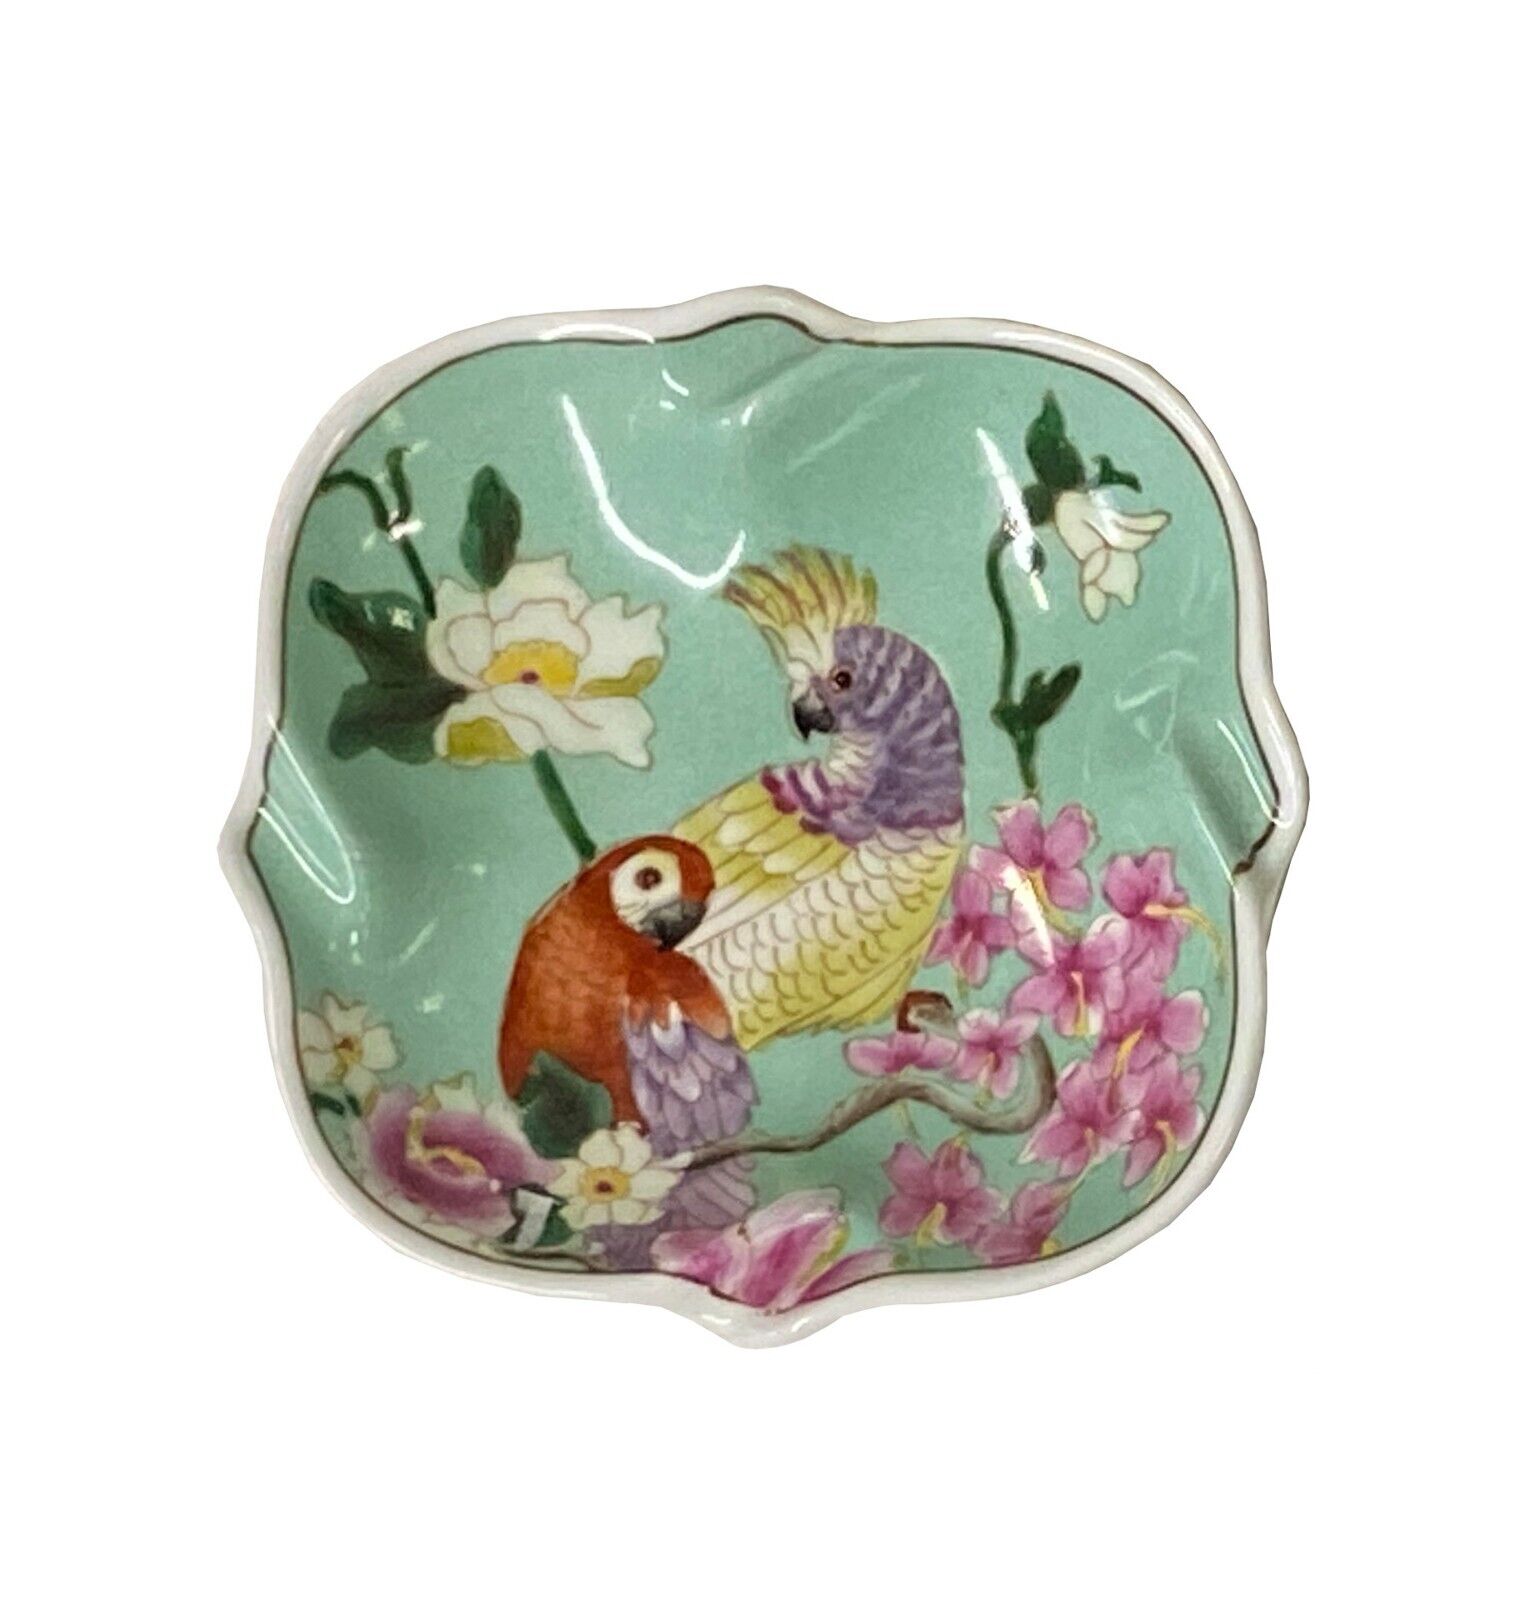 Lot of 2 Parrot Bird Graphic Square Light Green Porcelain Small Plates ws2456G